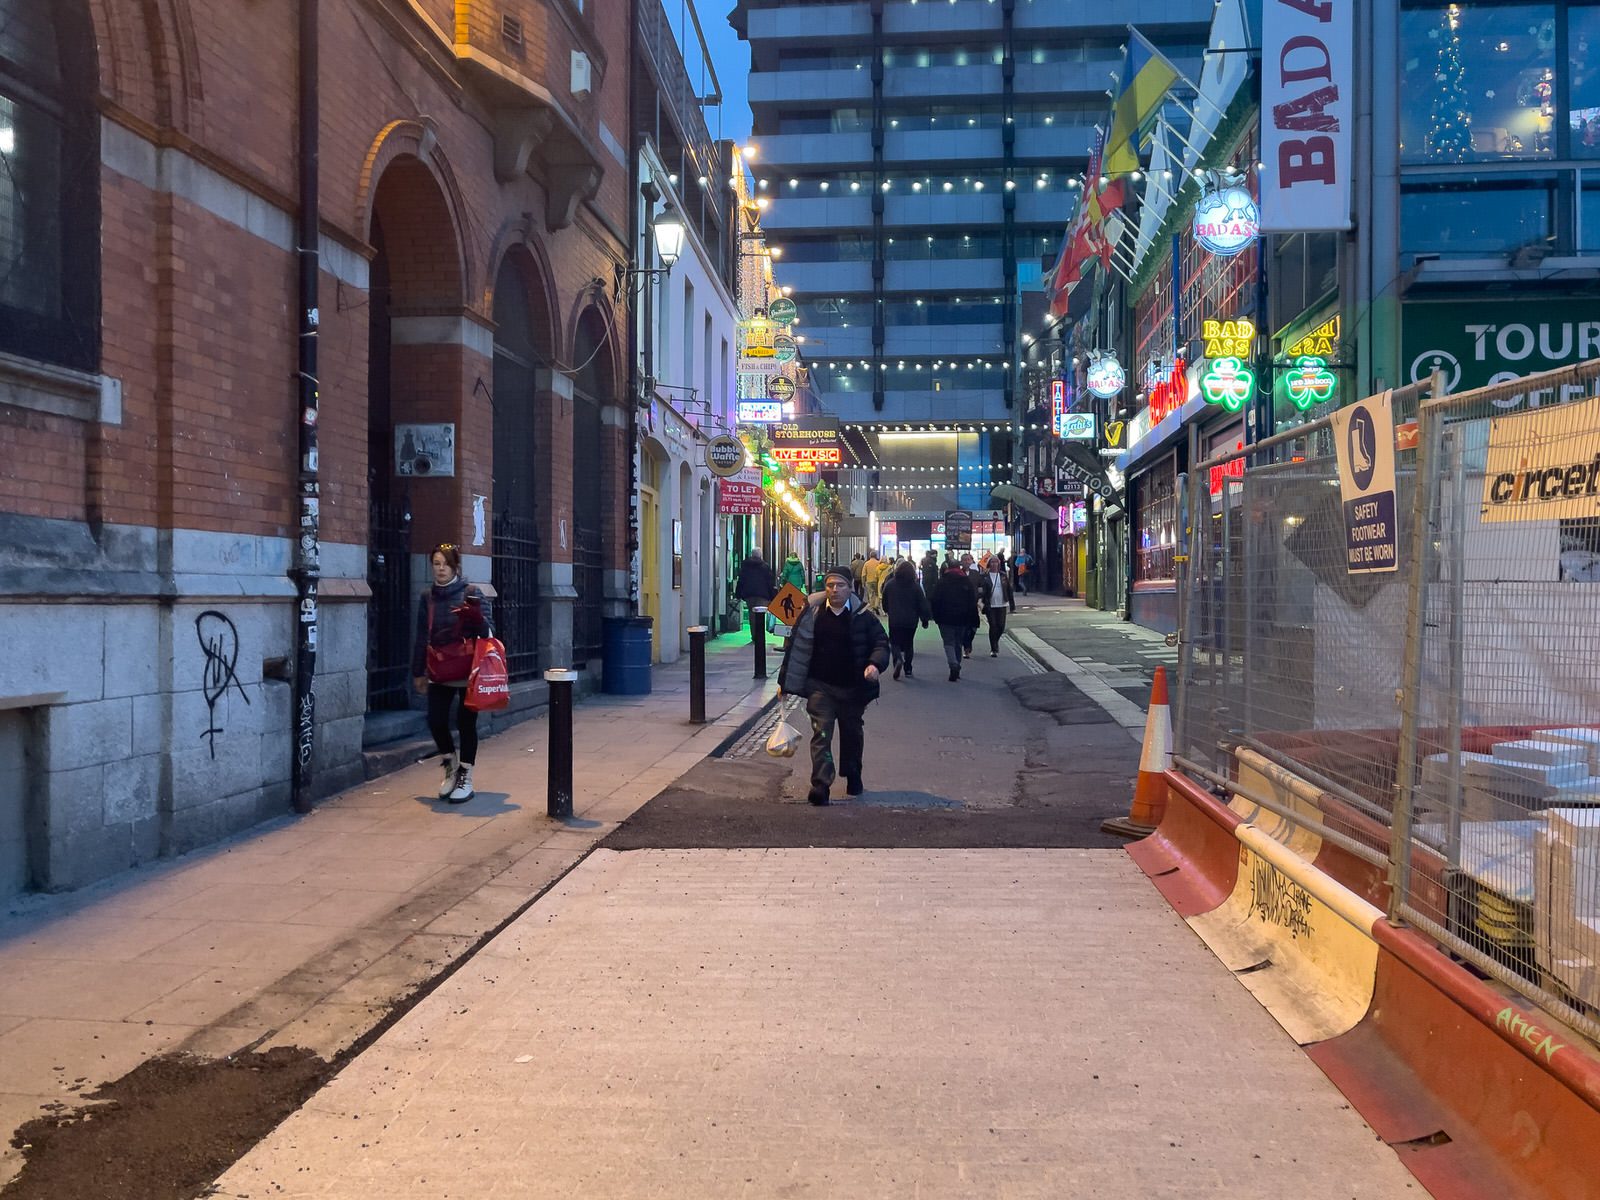 I VISITED TEMPLE BAR TODAY [AS NIGHTFALL WAS APPROACHING]-225342-1